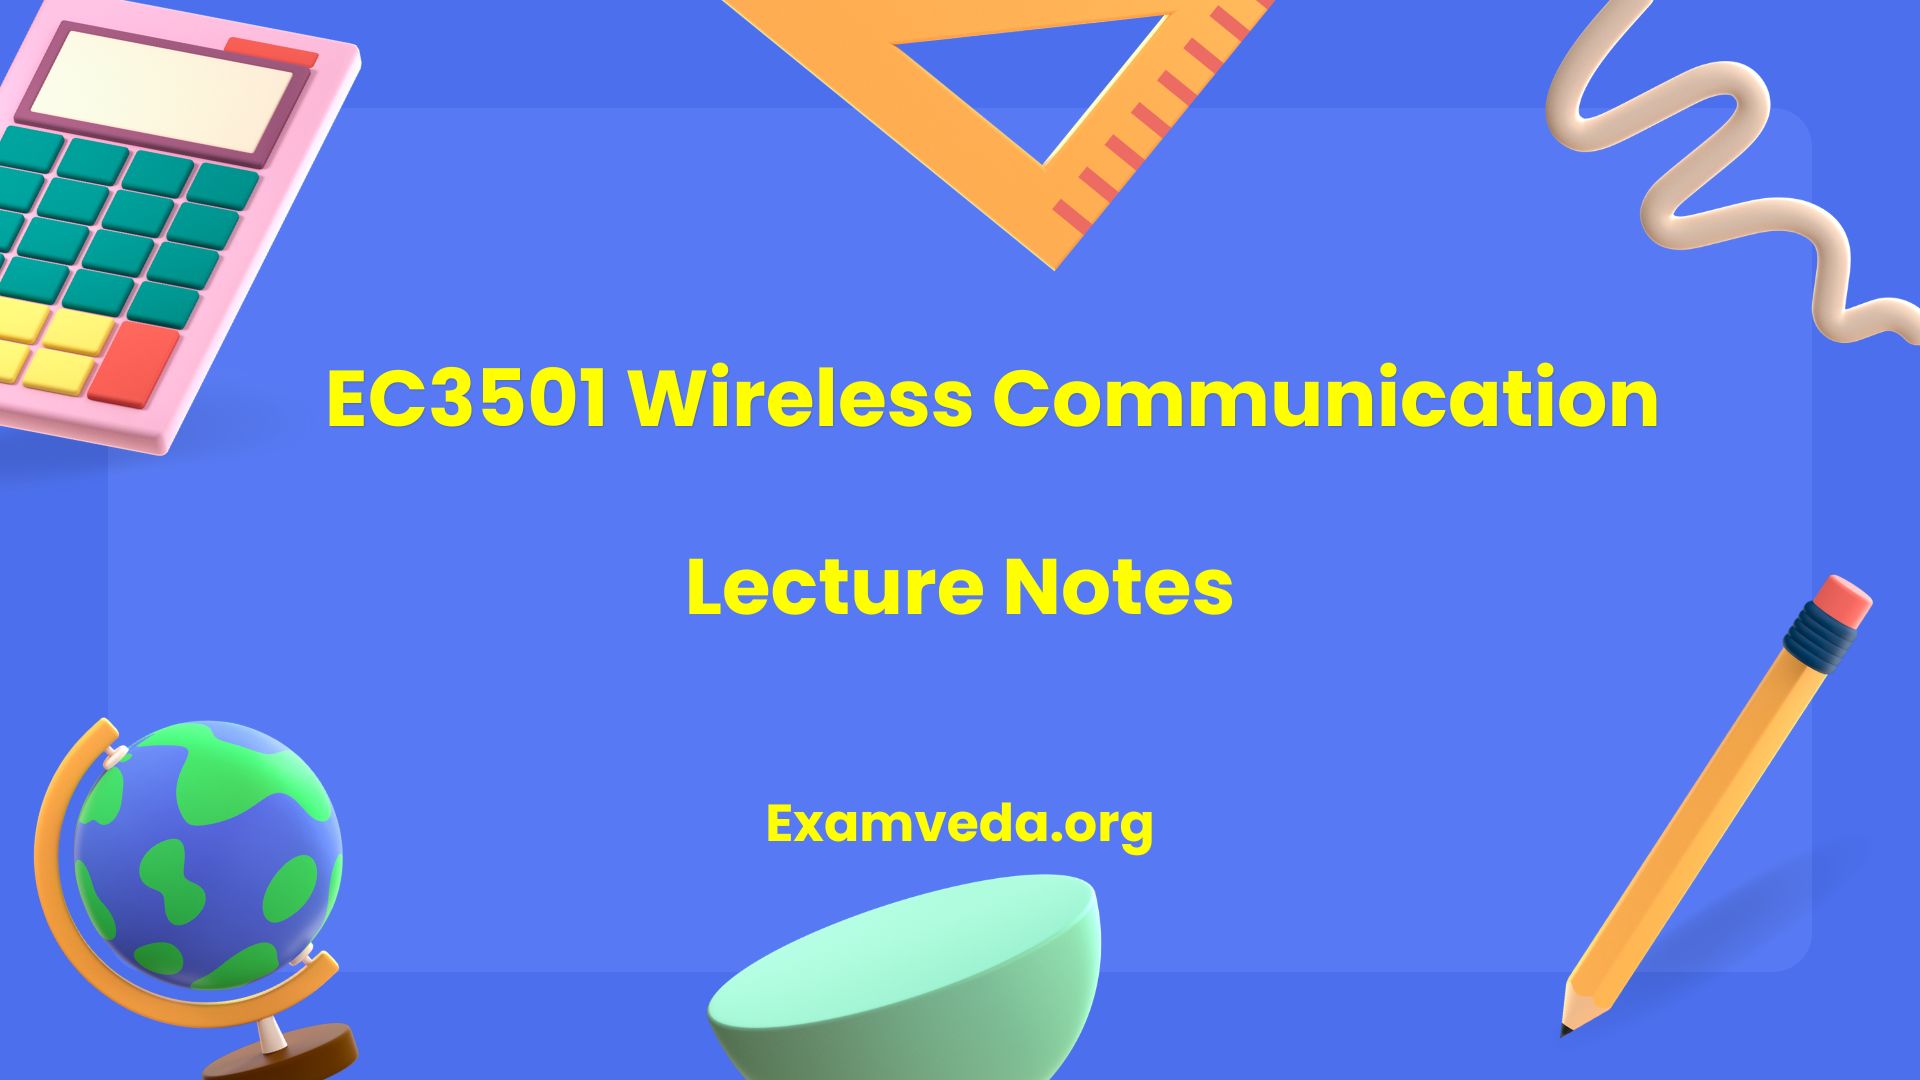 EC3501 Wireless Communication Lecture Notes